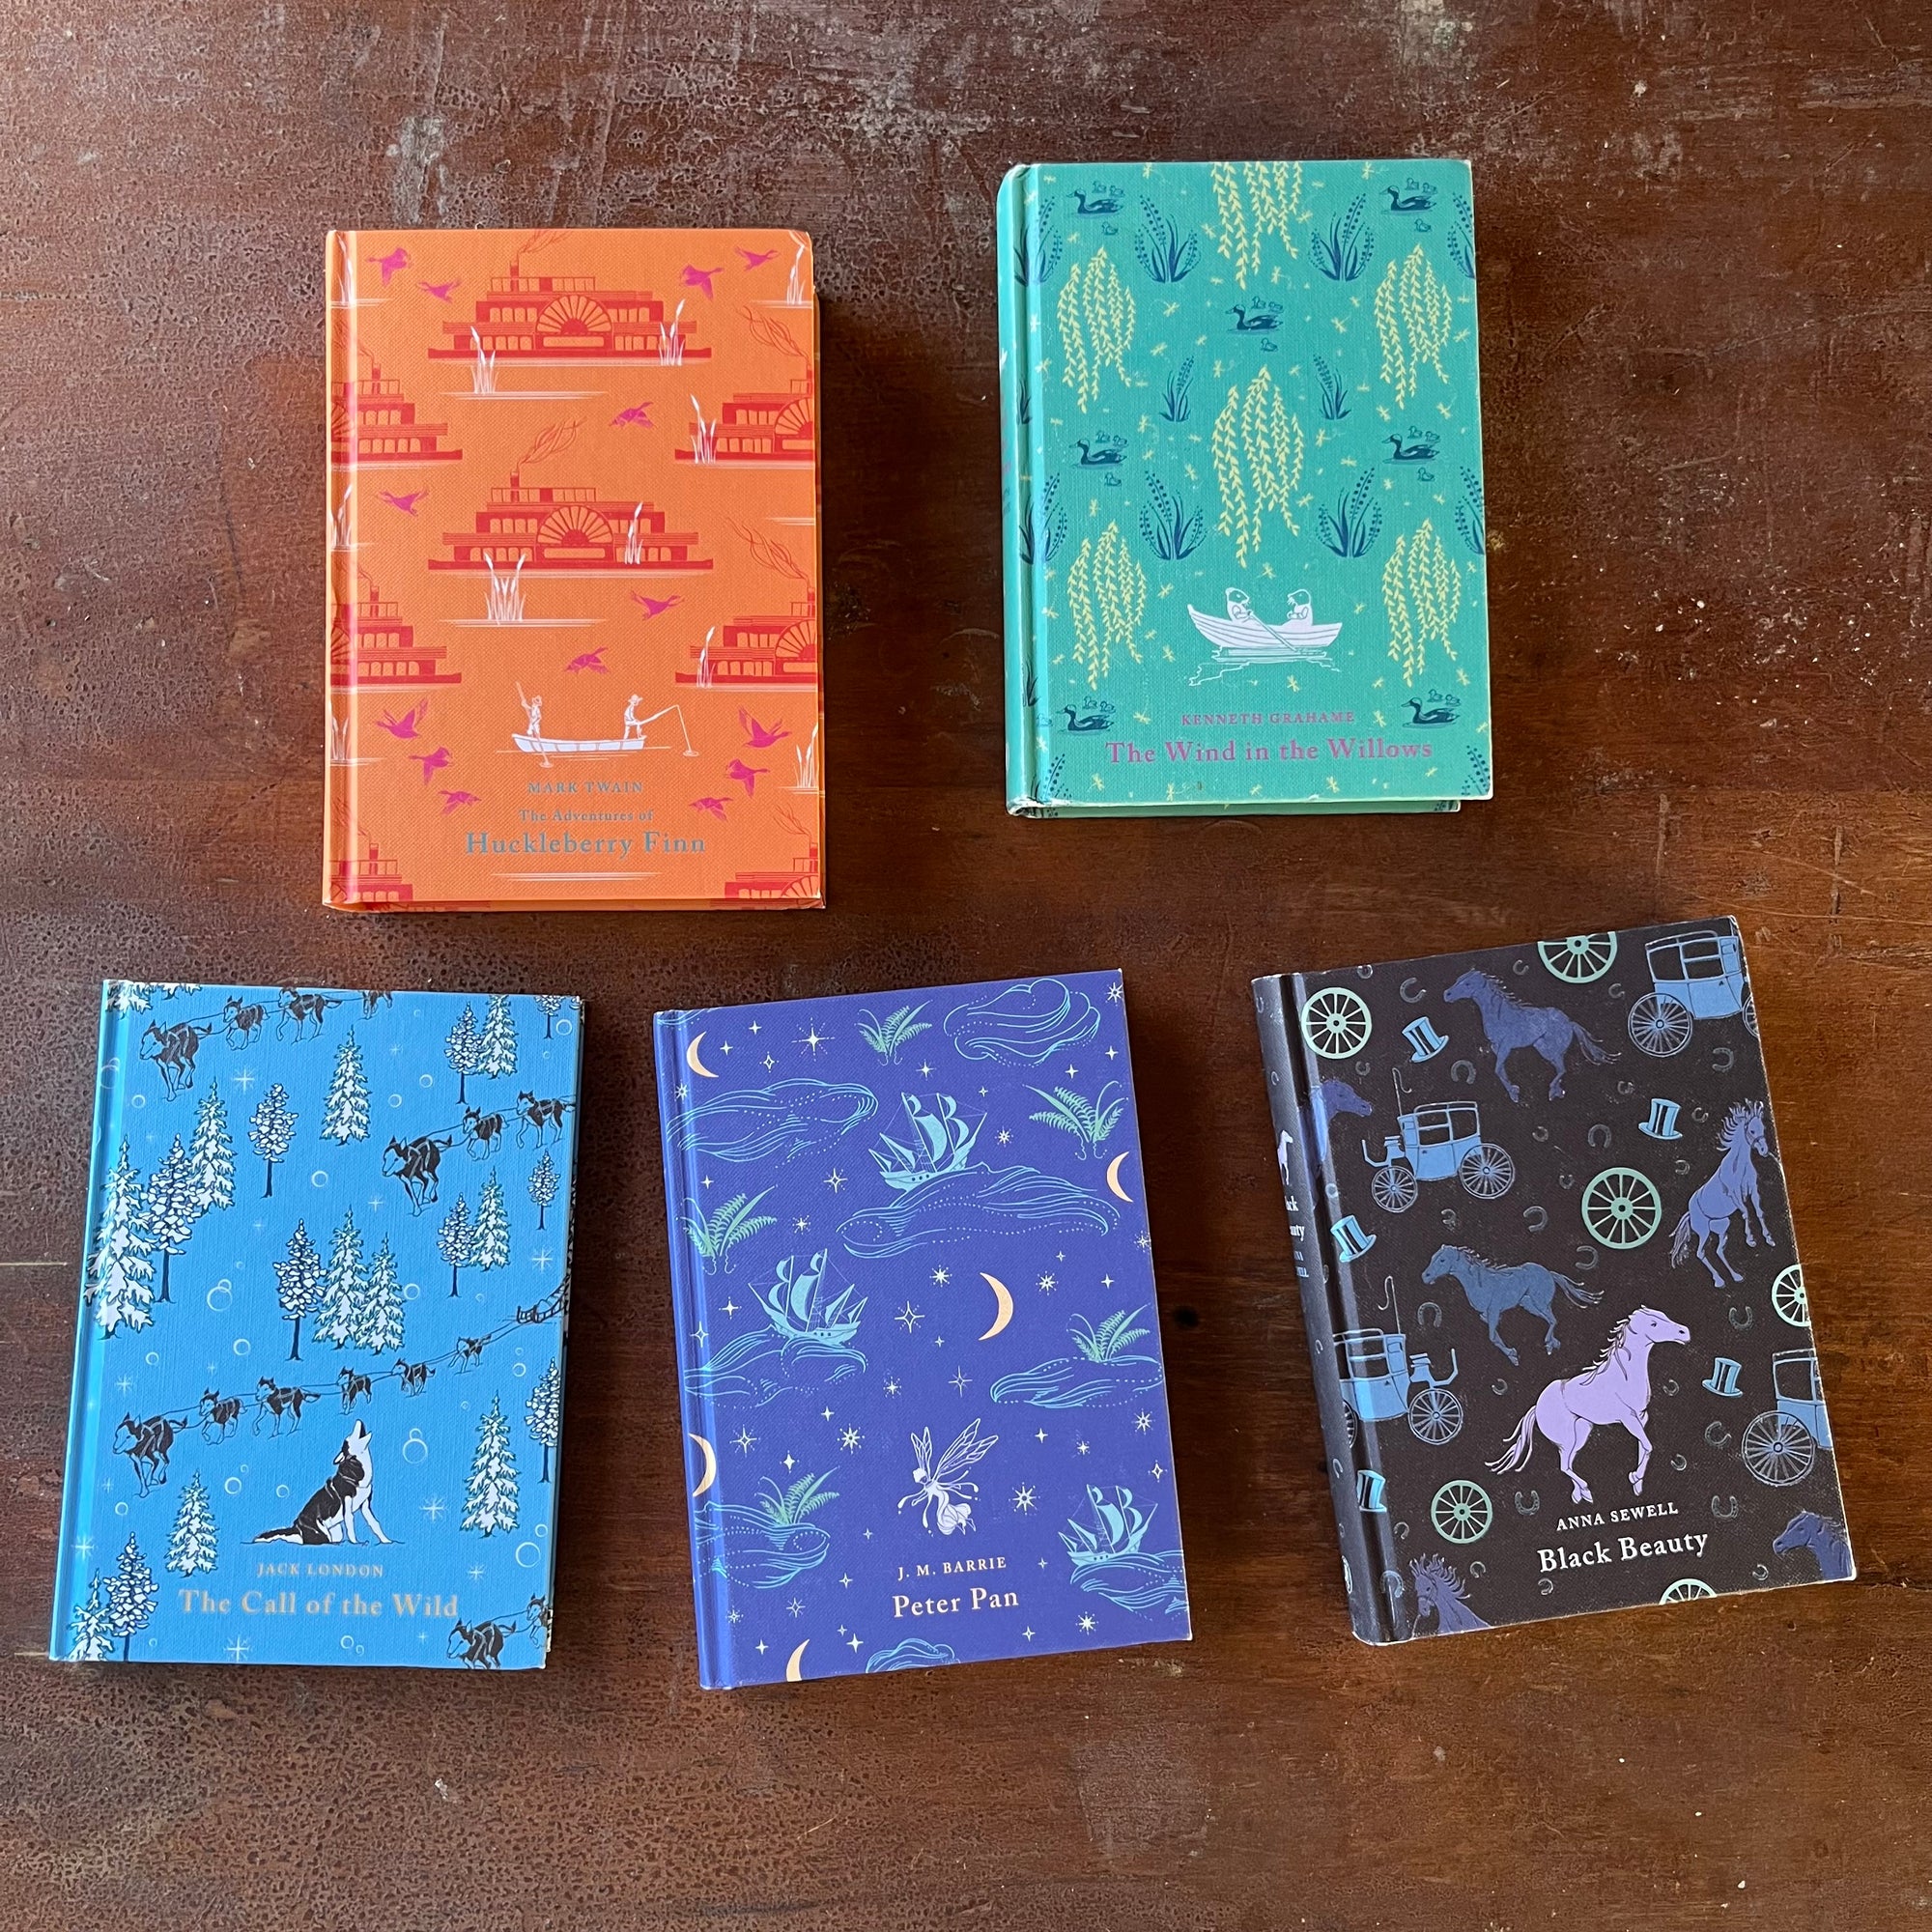 Puffin Children's Classics Book Set-5 Titles-The Adventures of Huckleberry Finn, The Wind in the Willows, The Call of the Wild, Black Beauty & Peter Pan-view of the decorative front covers created by Penguin designer Daniela Jaglenka Terrazini.